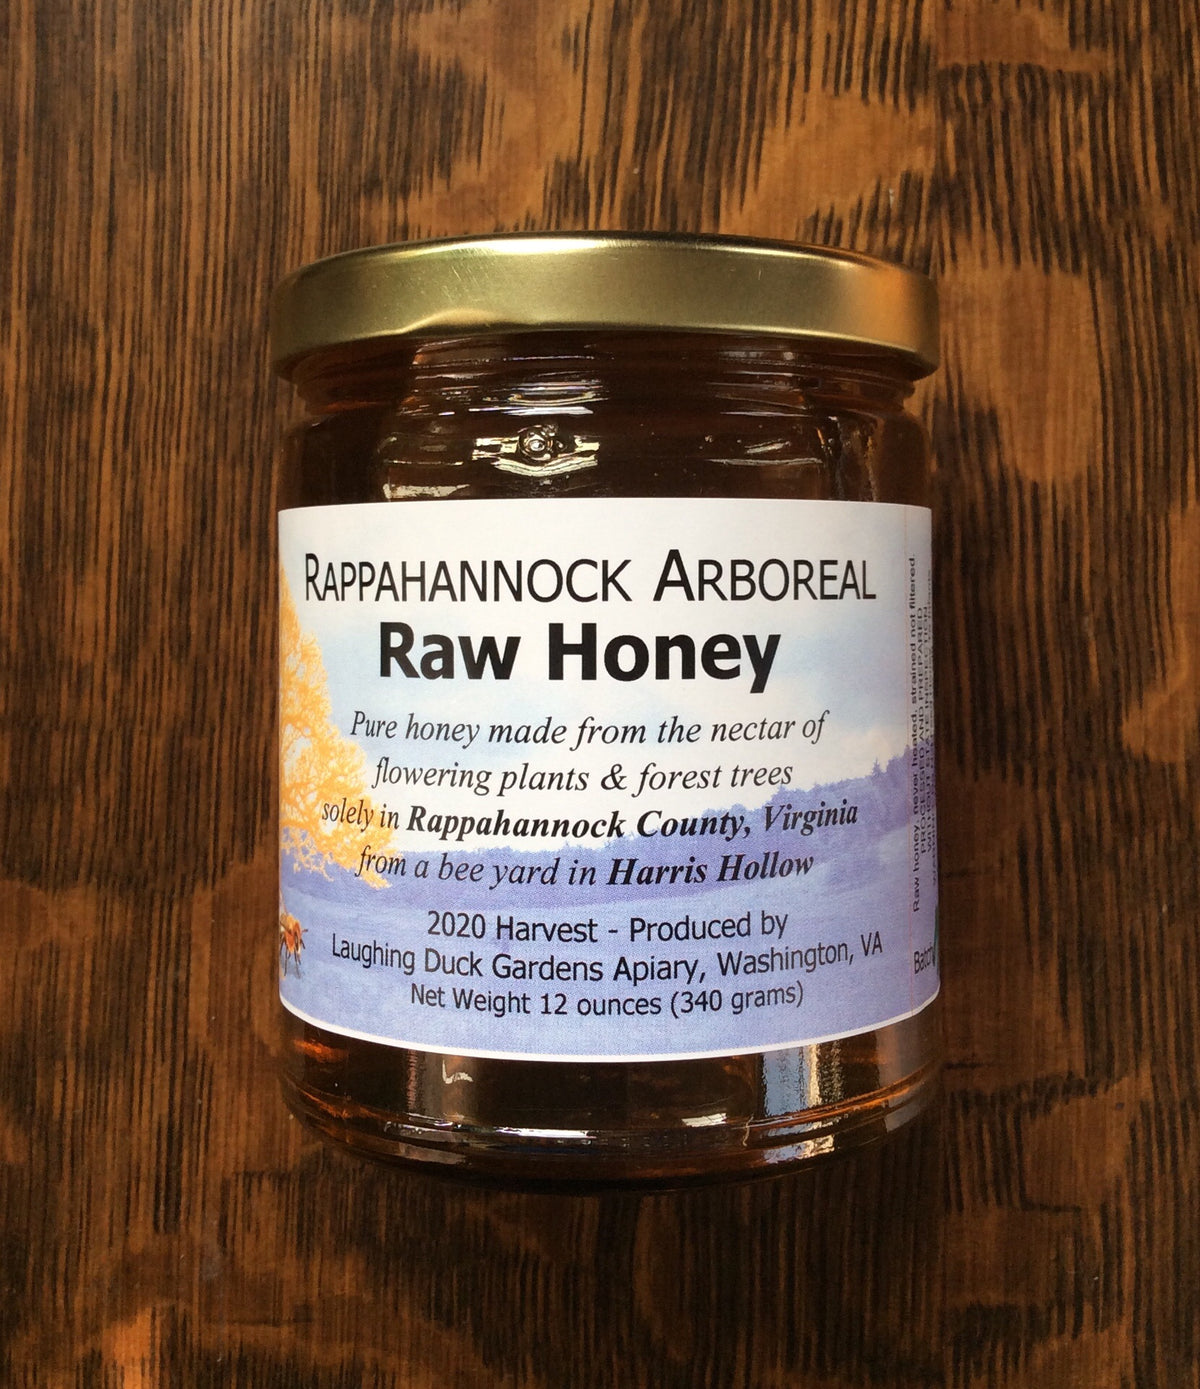 Rappahannock Arboreal Raw Honey by Laughing Duck Gardens Apiary